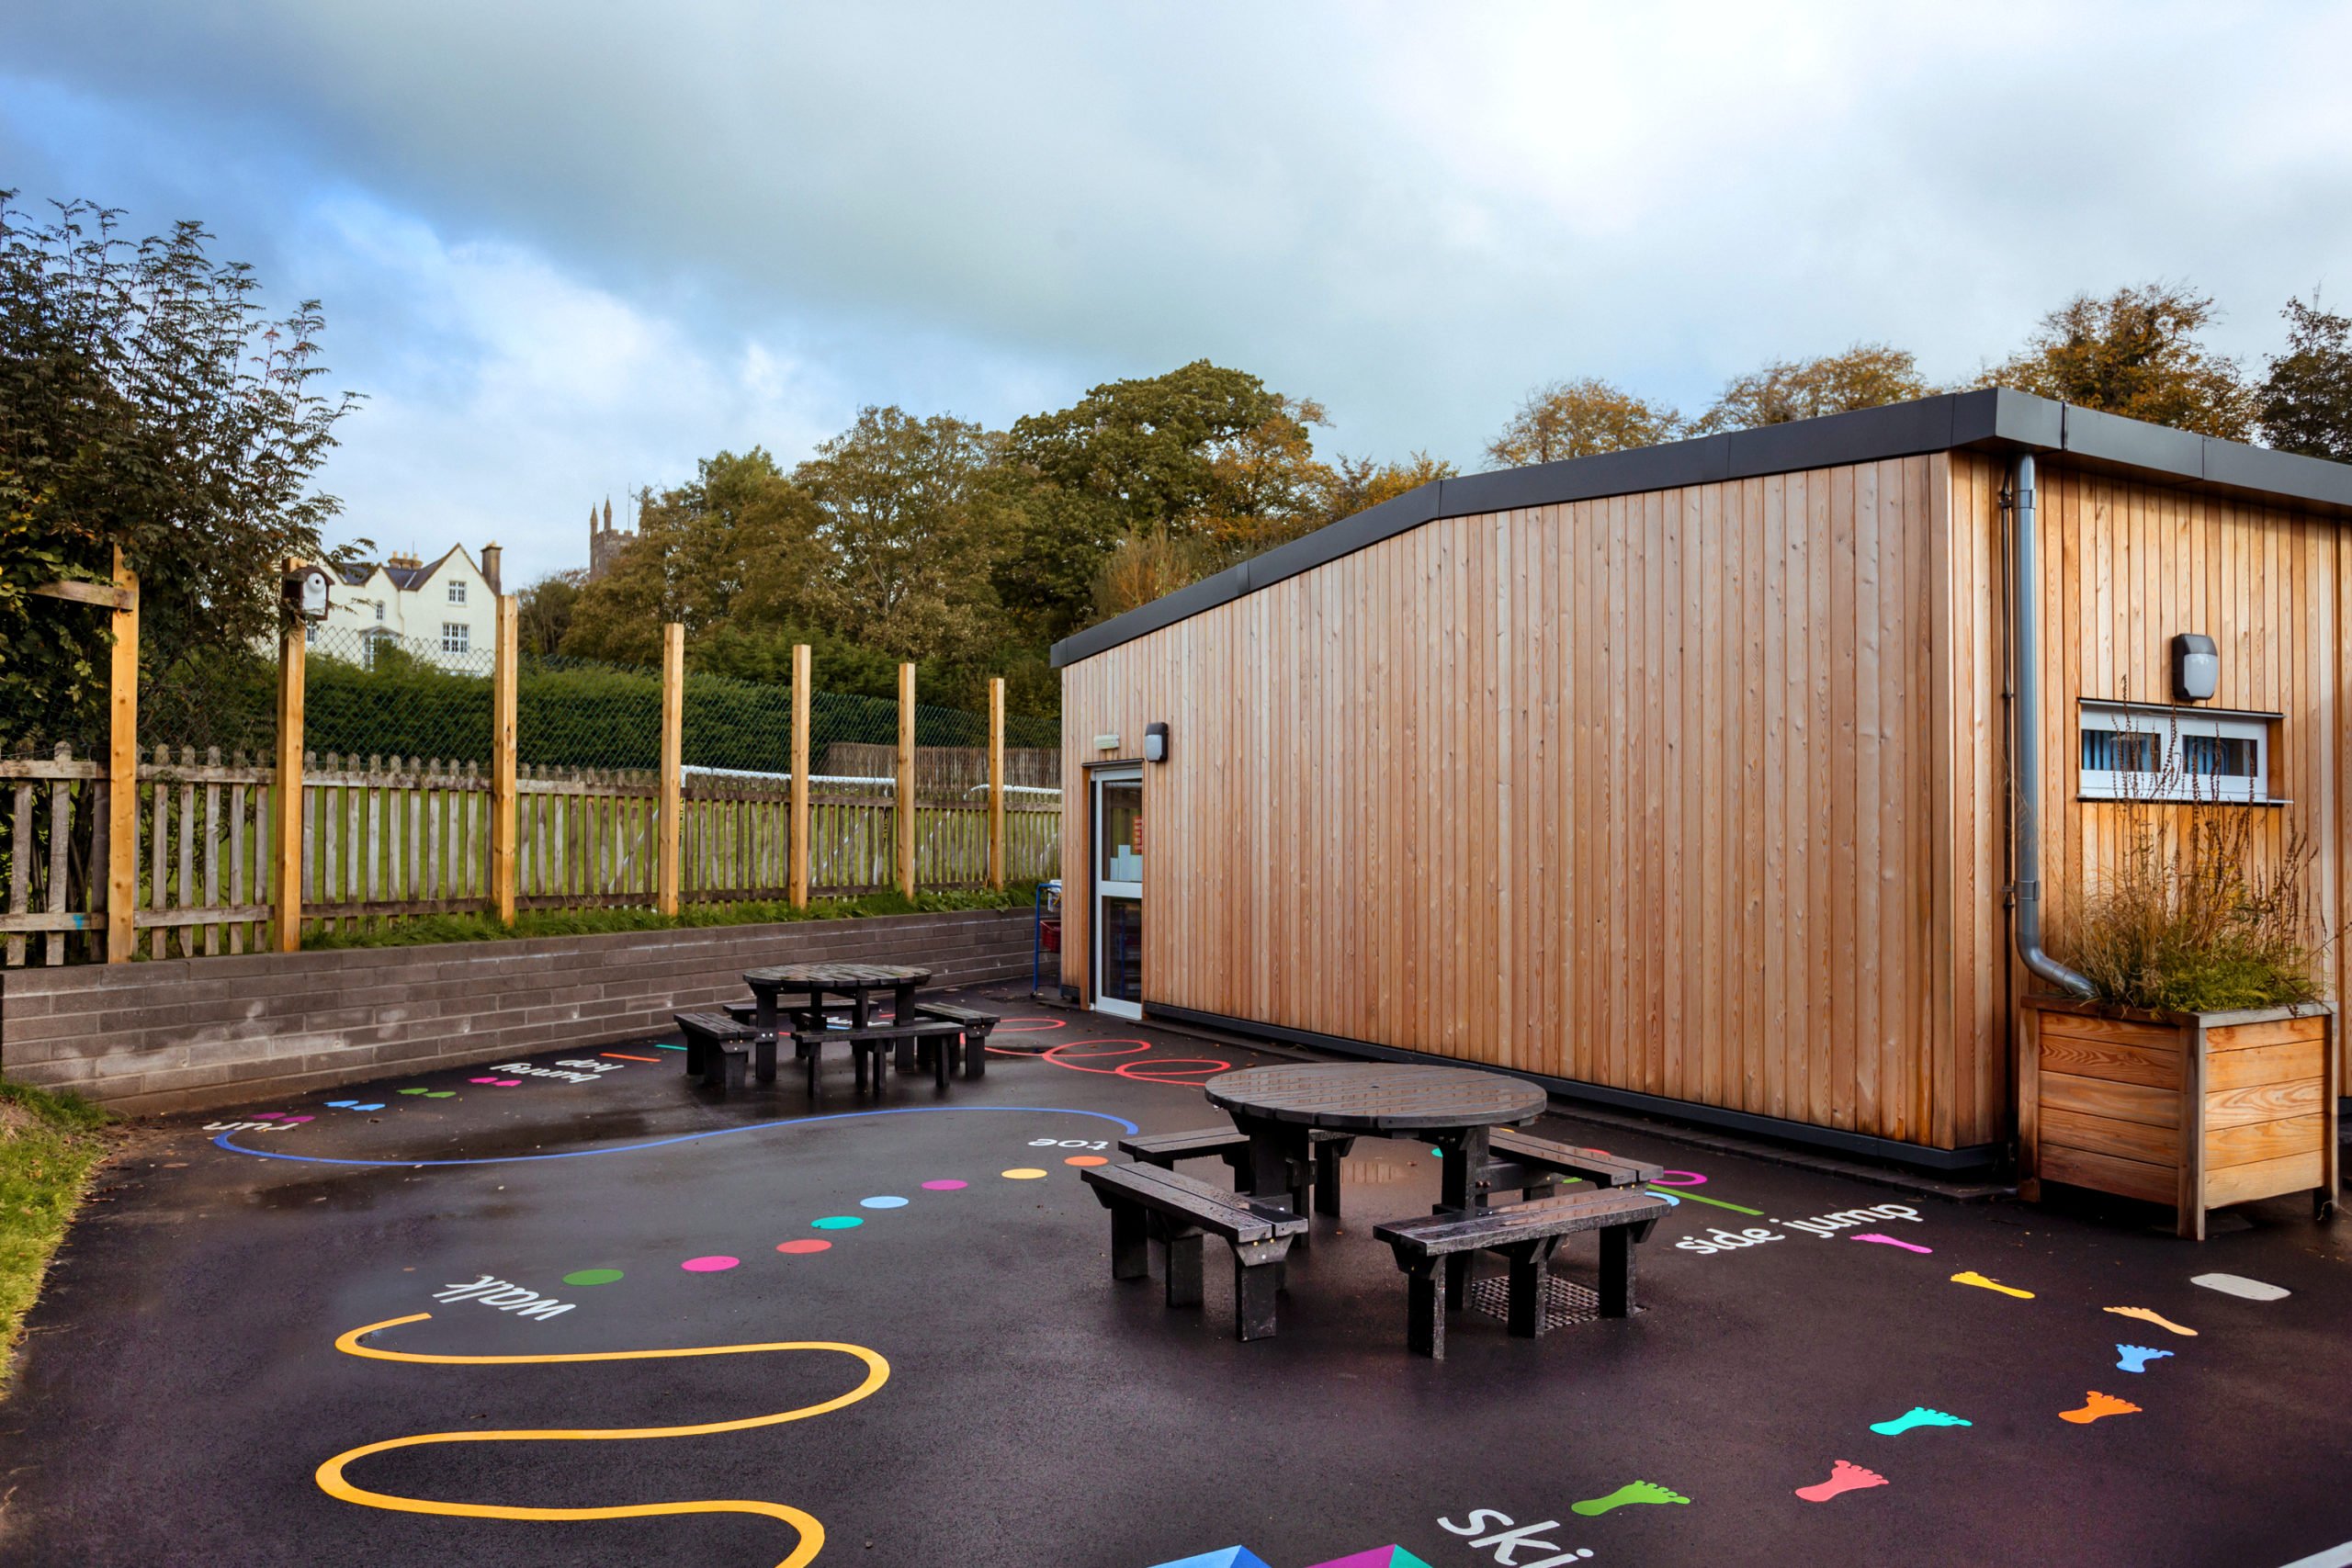 Pilton Infants School red cedar clad building with play ground outdoor space in foreground